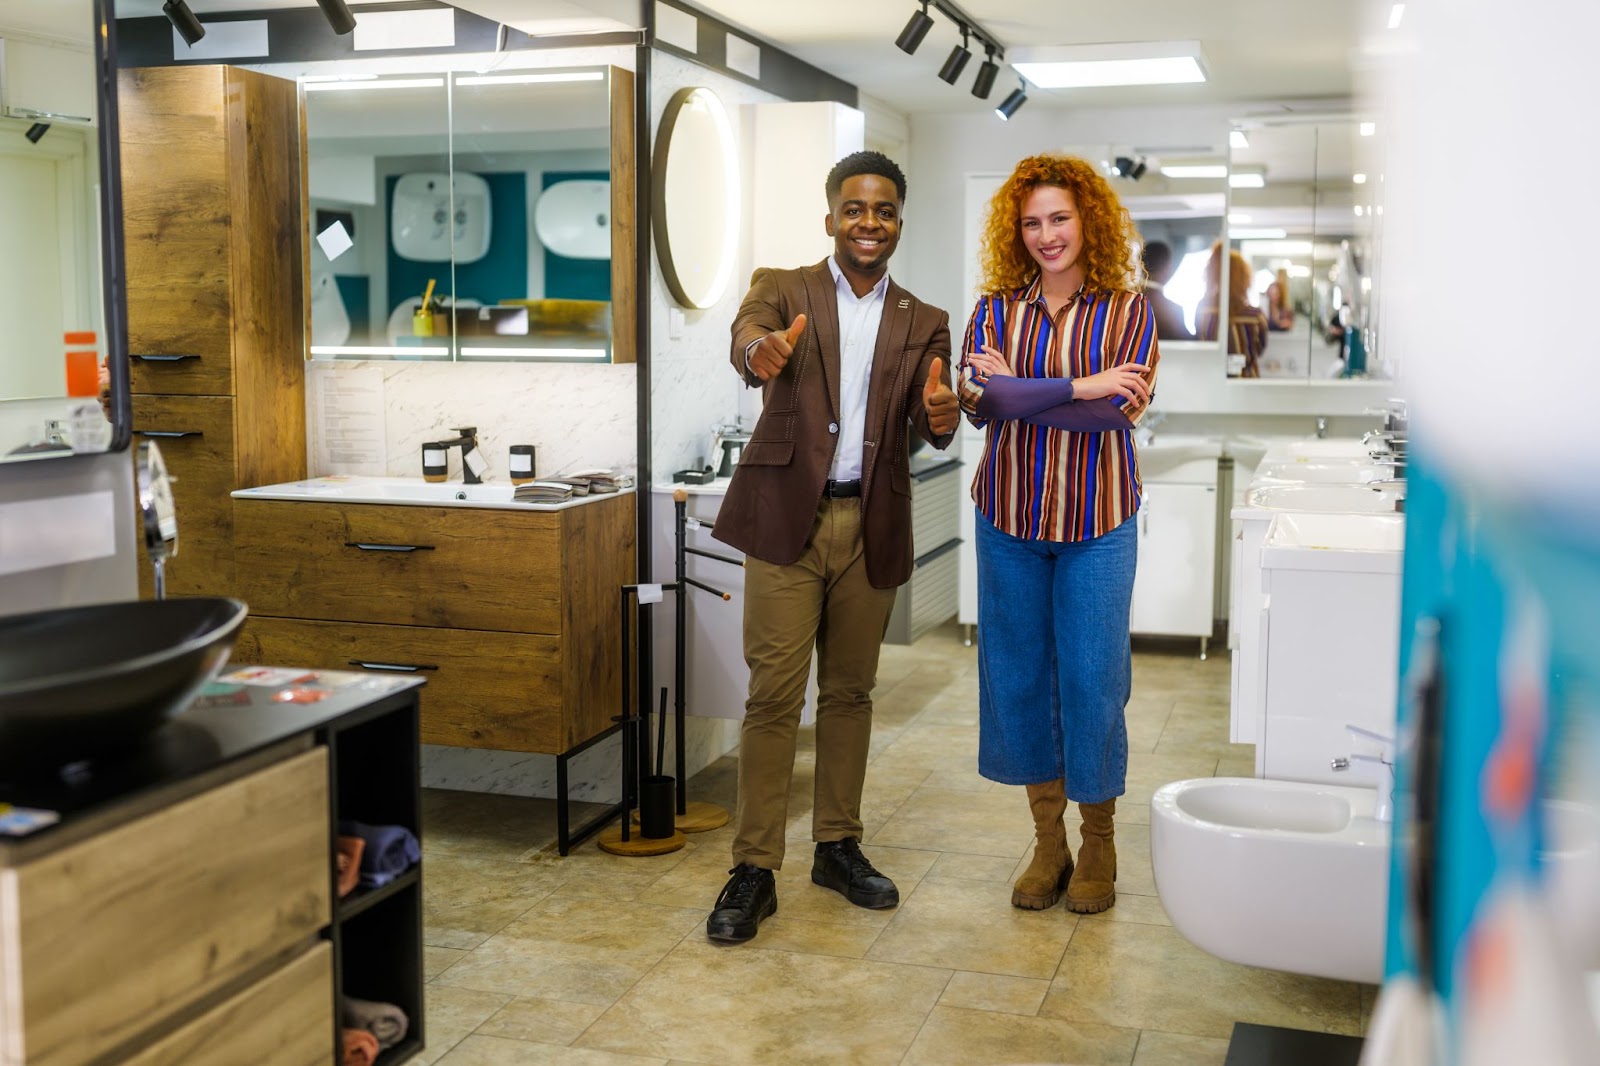 A male salesman presents various bathroom fixtures to his female customer in a well-appointed bathroom store, aiding her selection process.